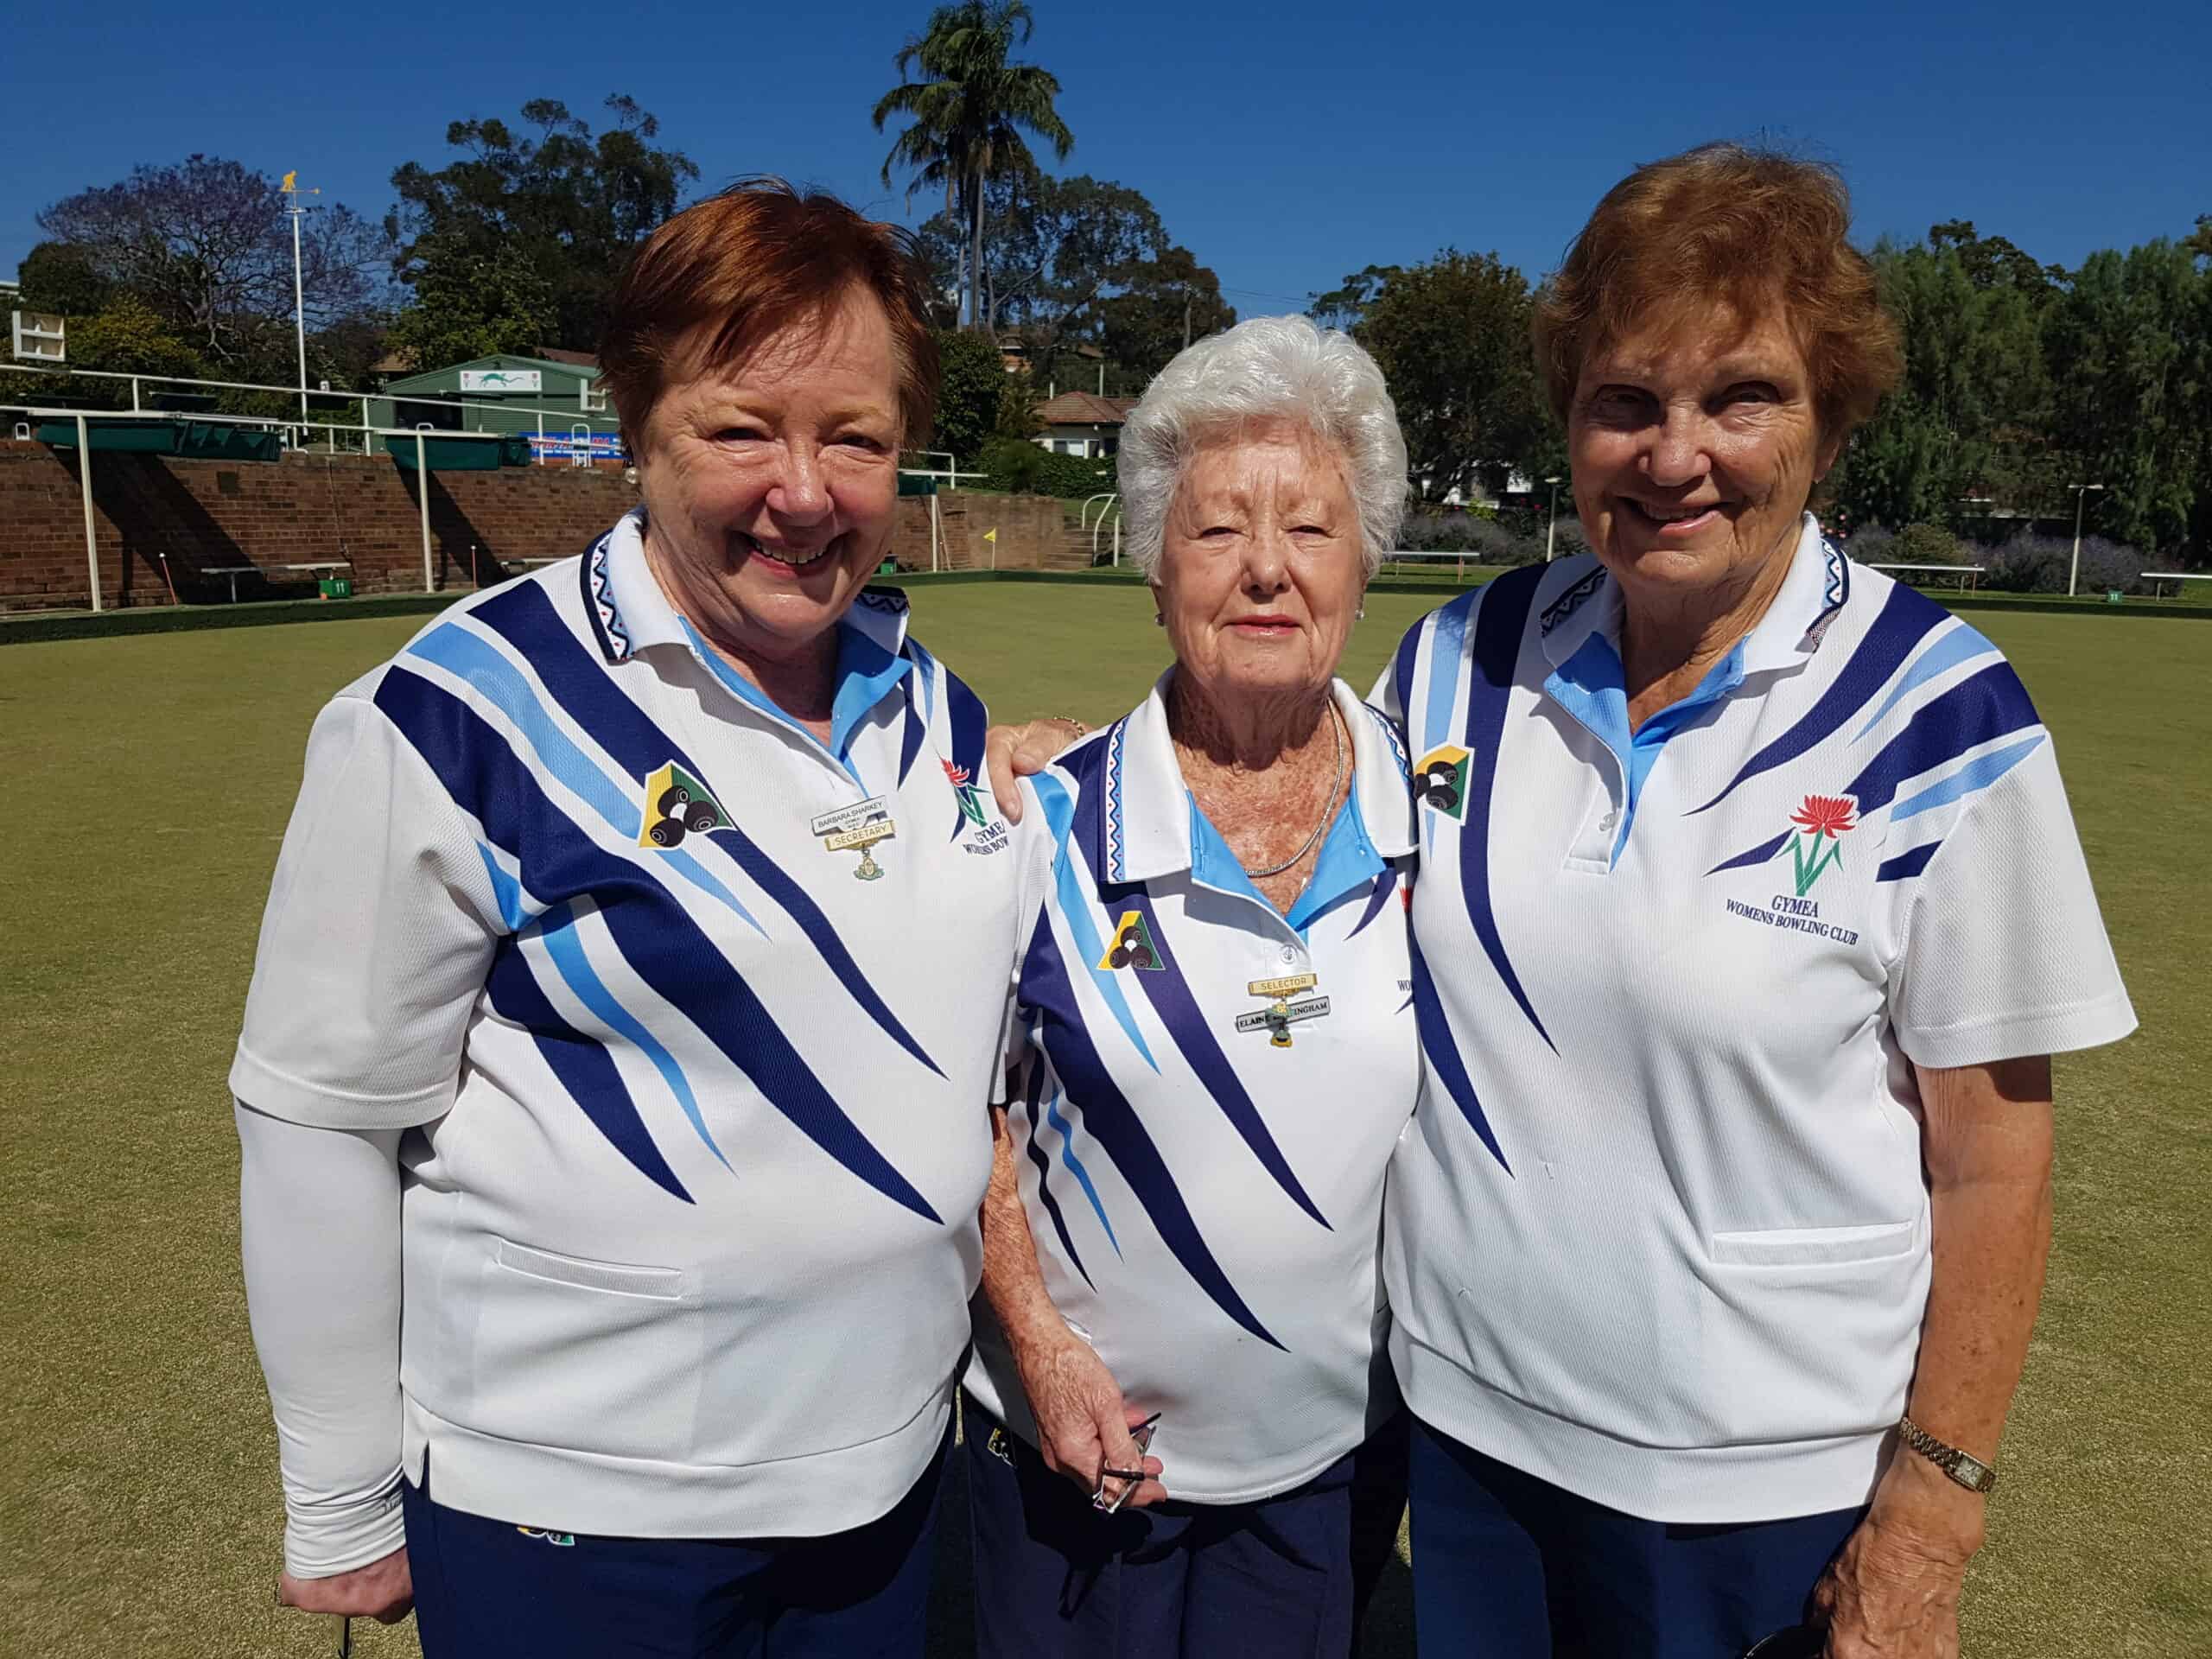 Featured Image for “GYMEA WOMEN’S BOWLS 2018 WINNERS”